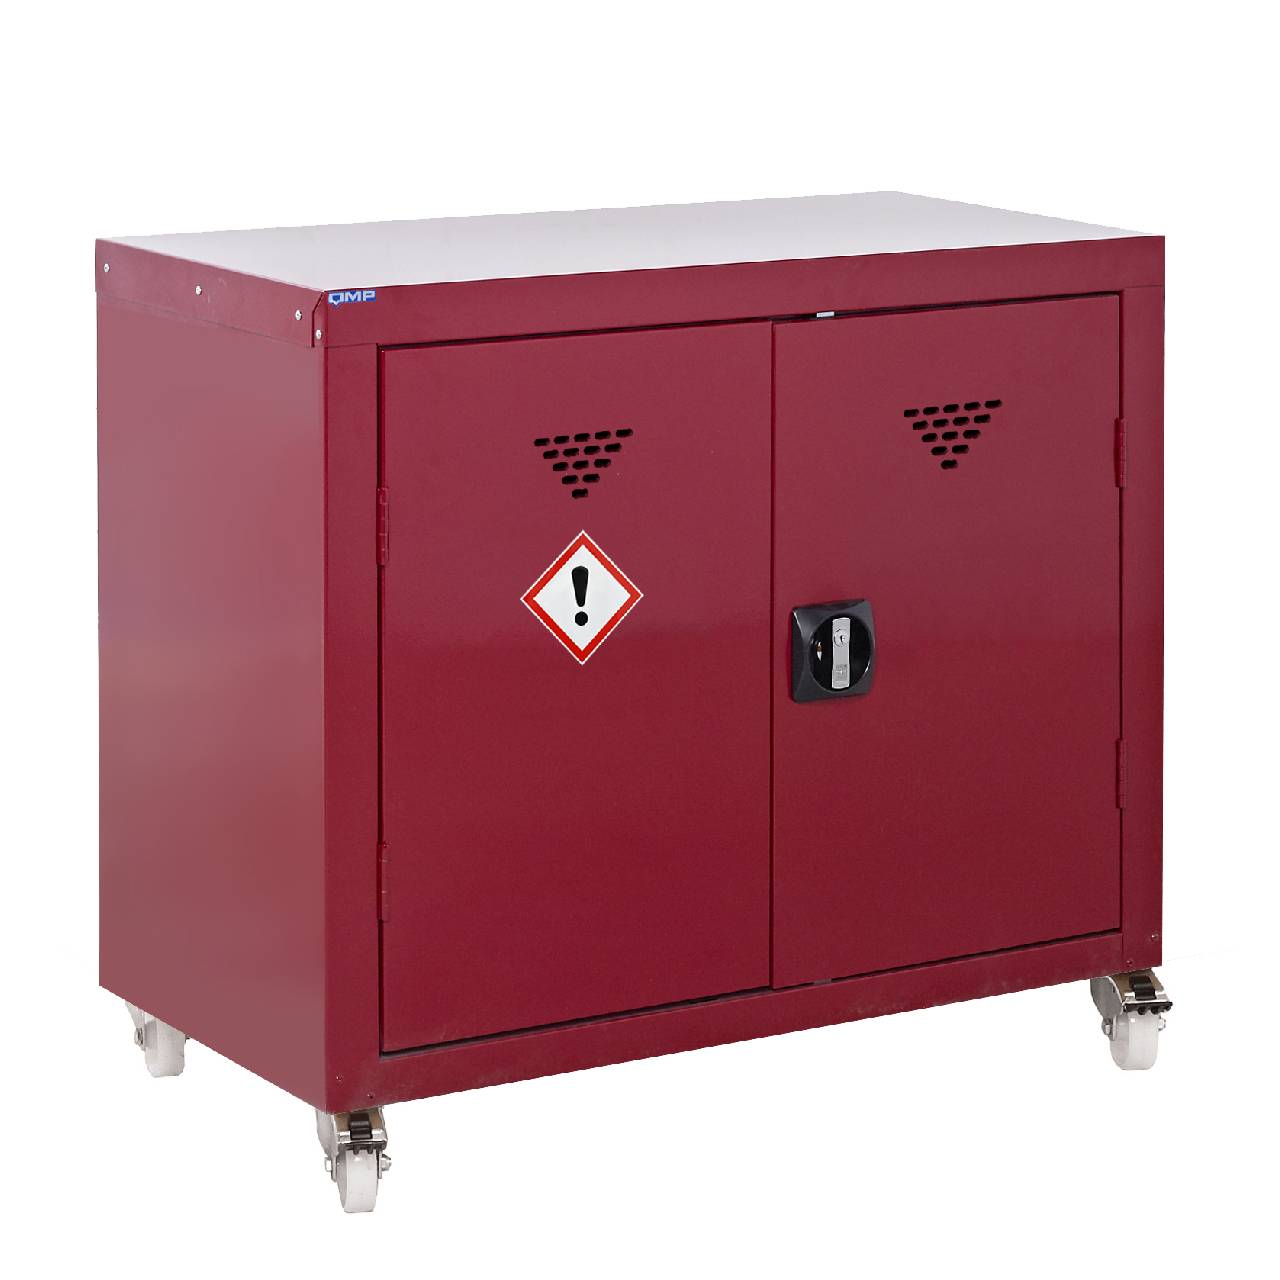 QMP Pesticide & Agrochemical Mobile Cabinets - 840H x 900W x 460D mm